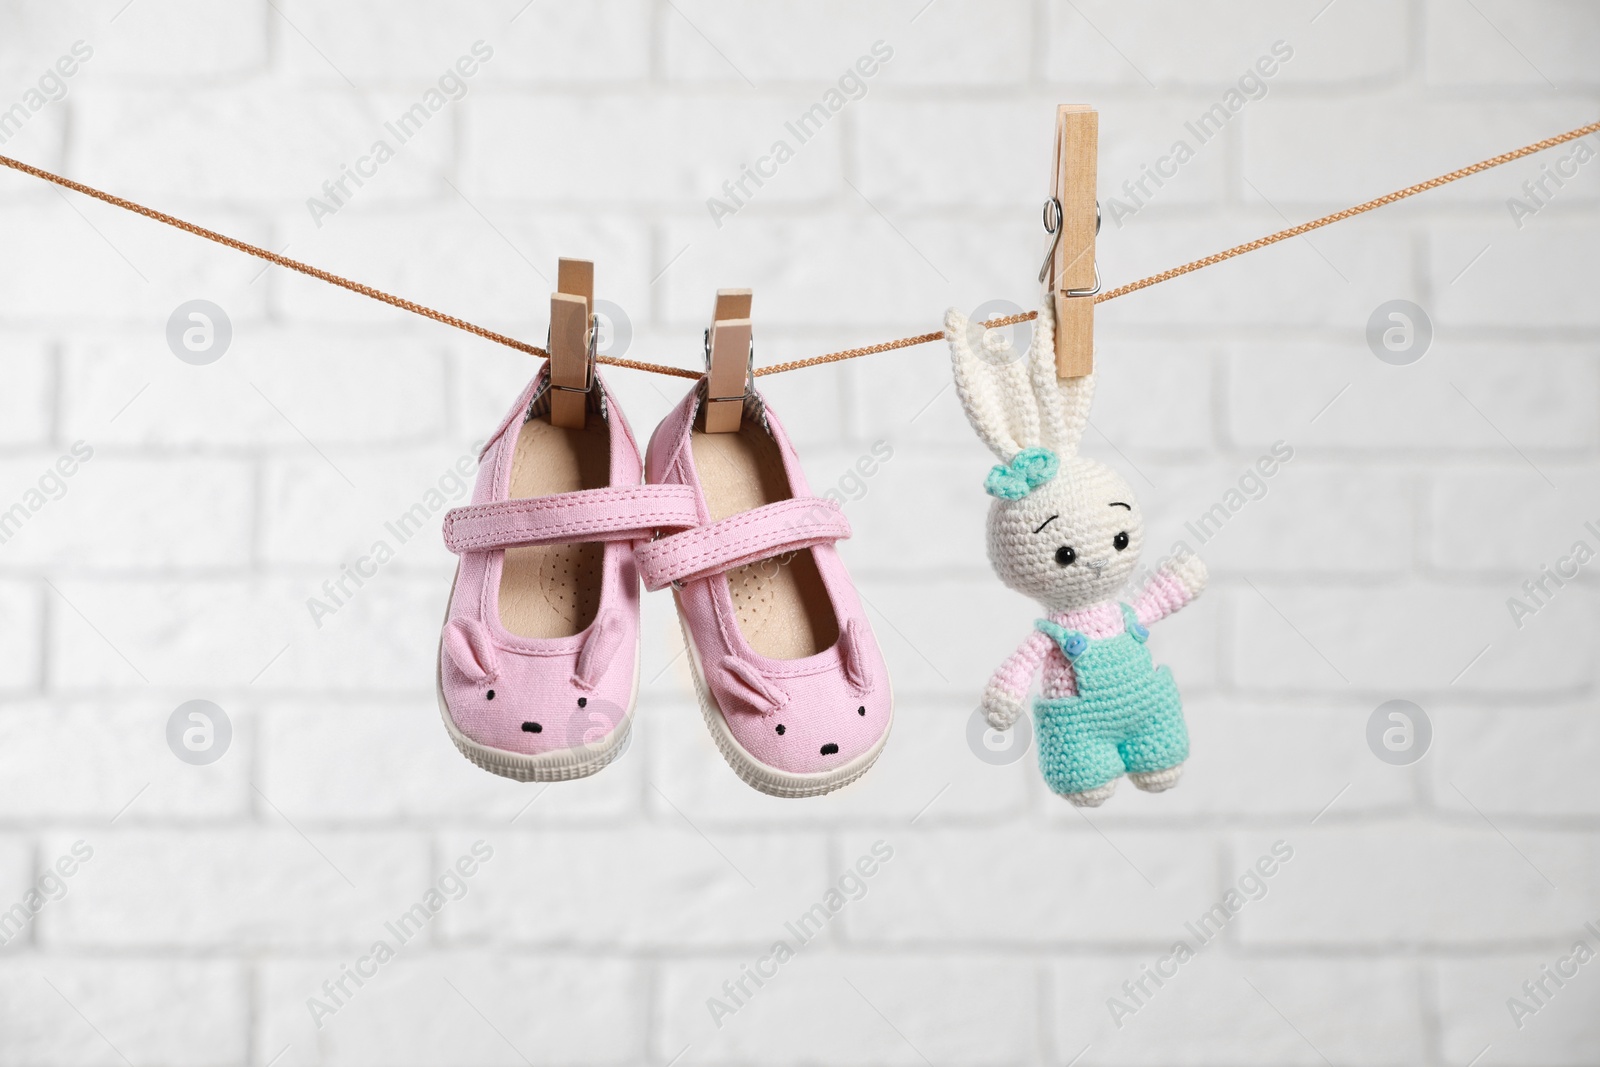 Photo of Cute pink baby shoes and crochet toy drying on washing line against white brick wall